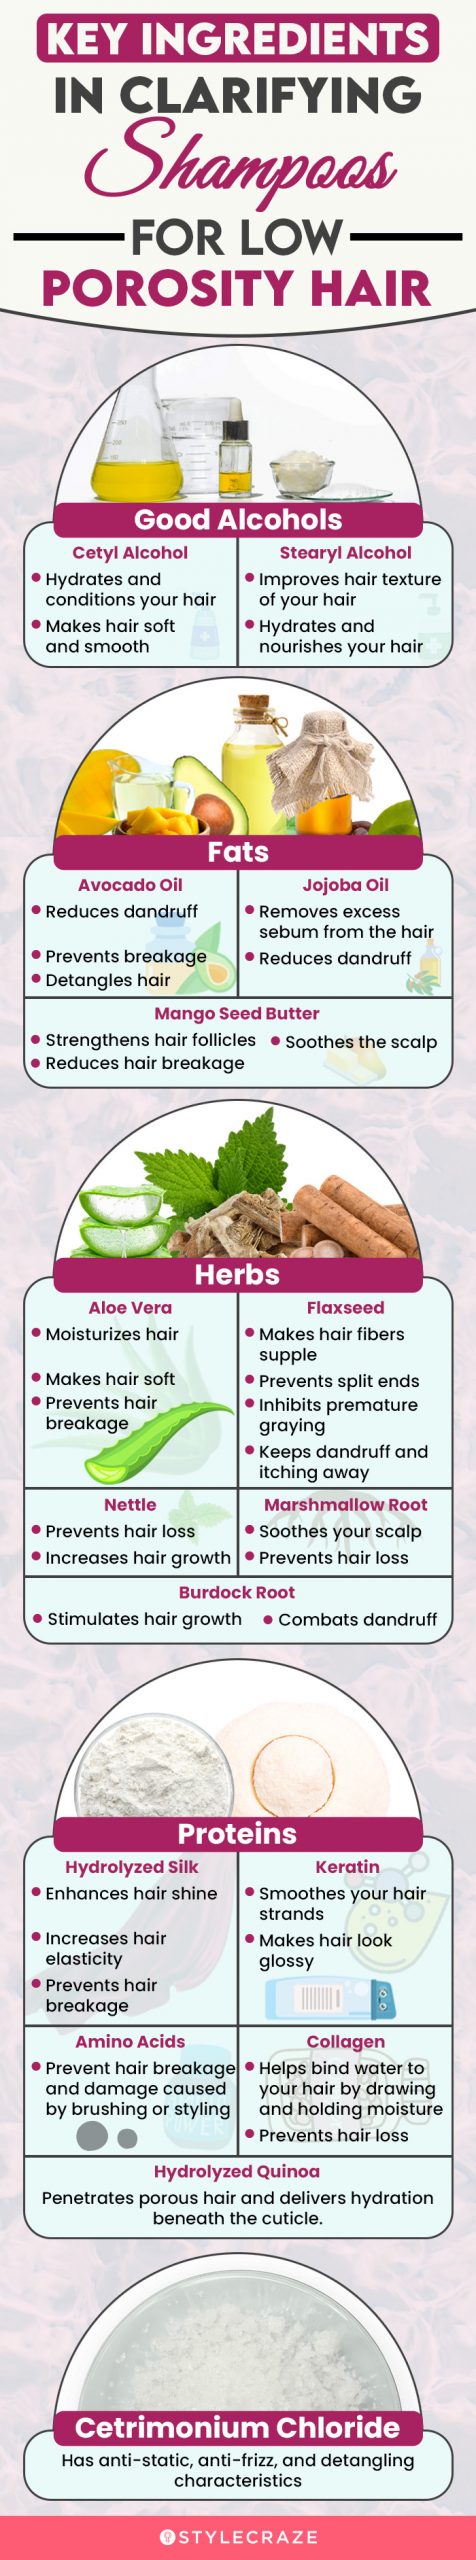 Key Ingredients In Clarifying Shampoos For Low Porosity Hair  [infographic]